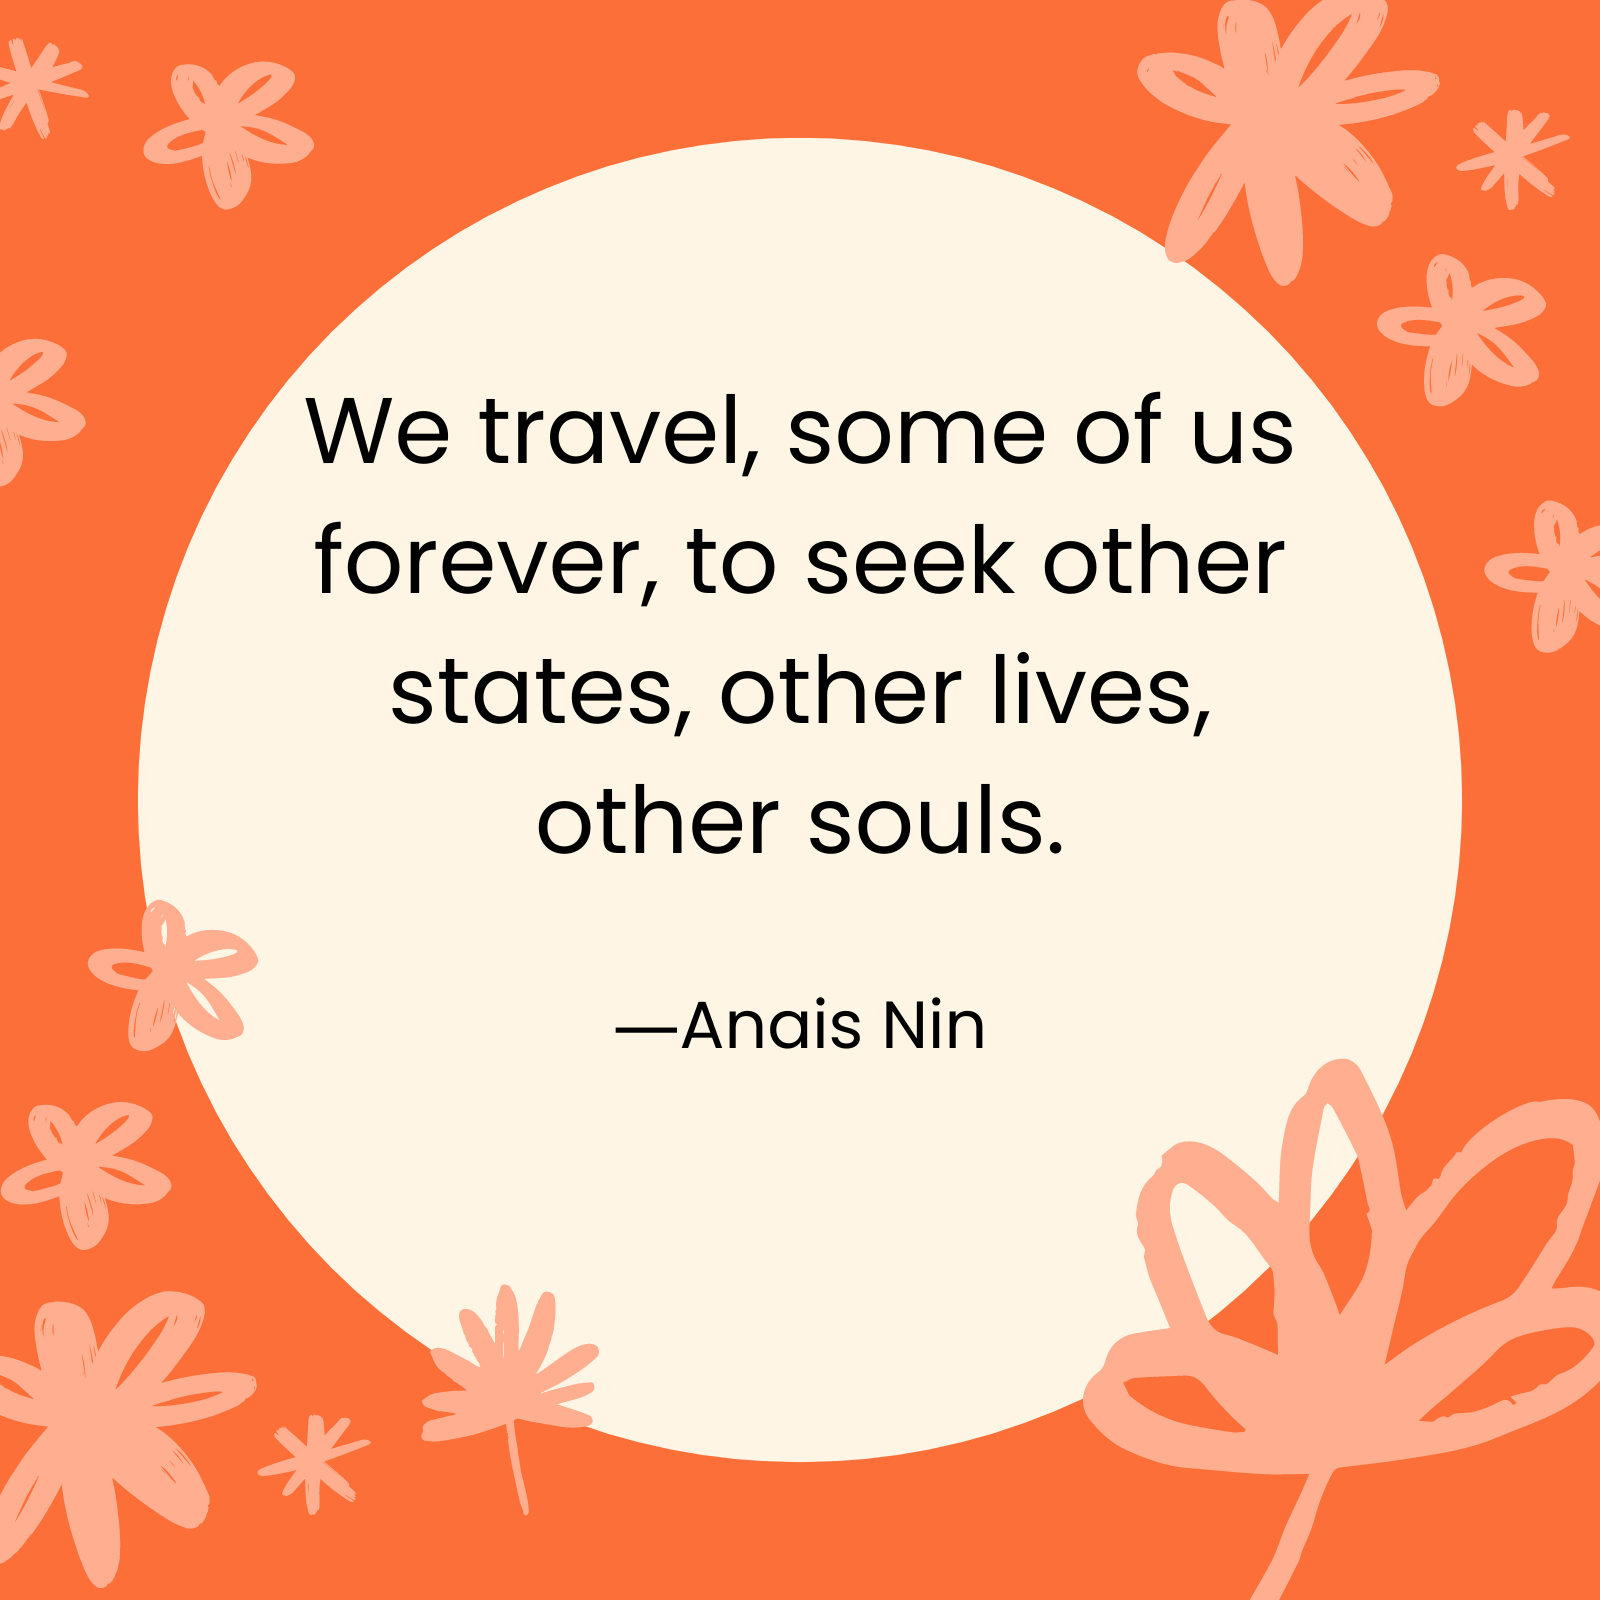 <p>"We travel, some of us forever, to seek other states, other lives, other souls." —Anais Nin</p>